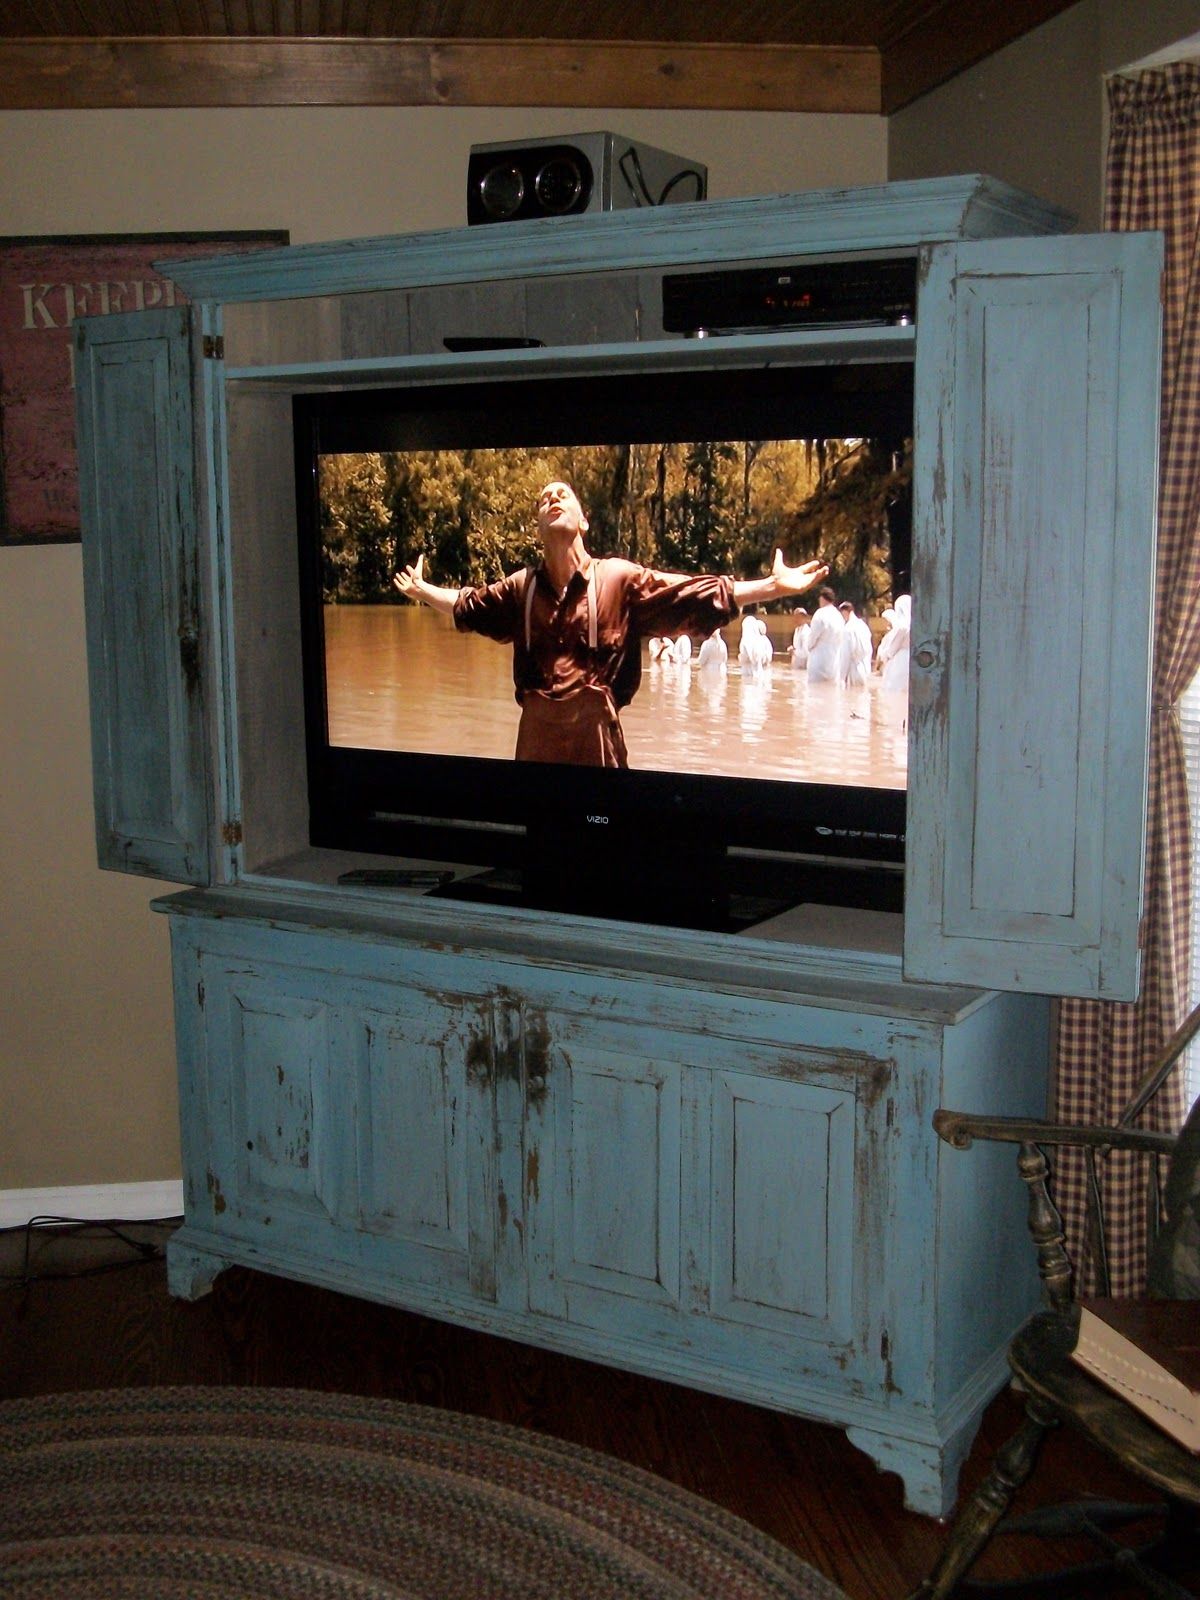 Letters From The Chair: Flat Screen Tv Cabinet Inside Tv Inside Cabinets (Photo 3 of 15)